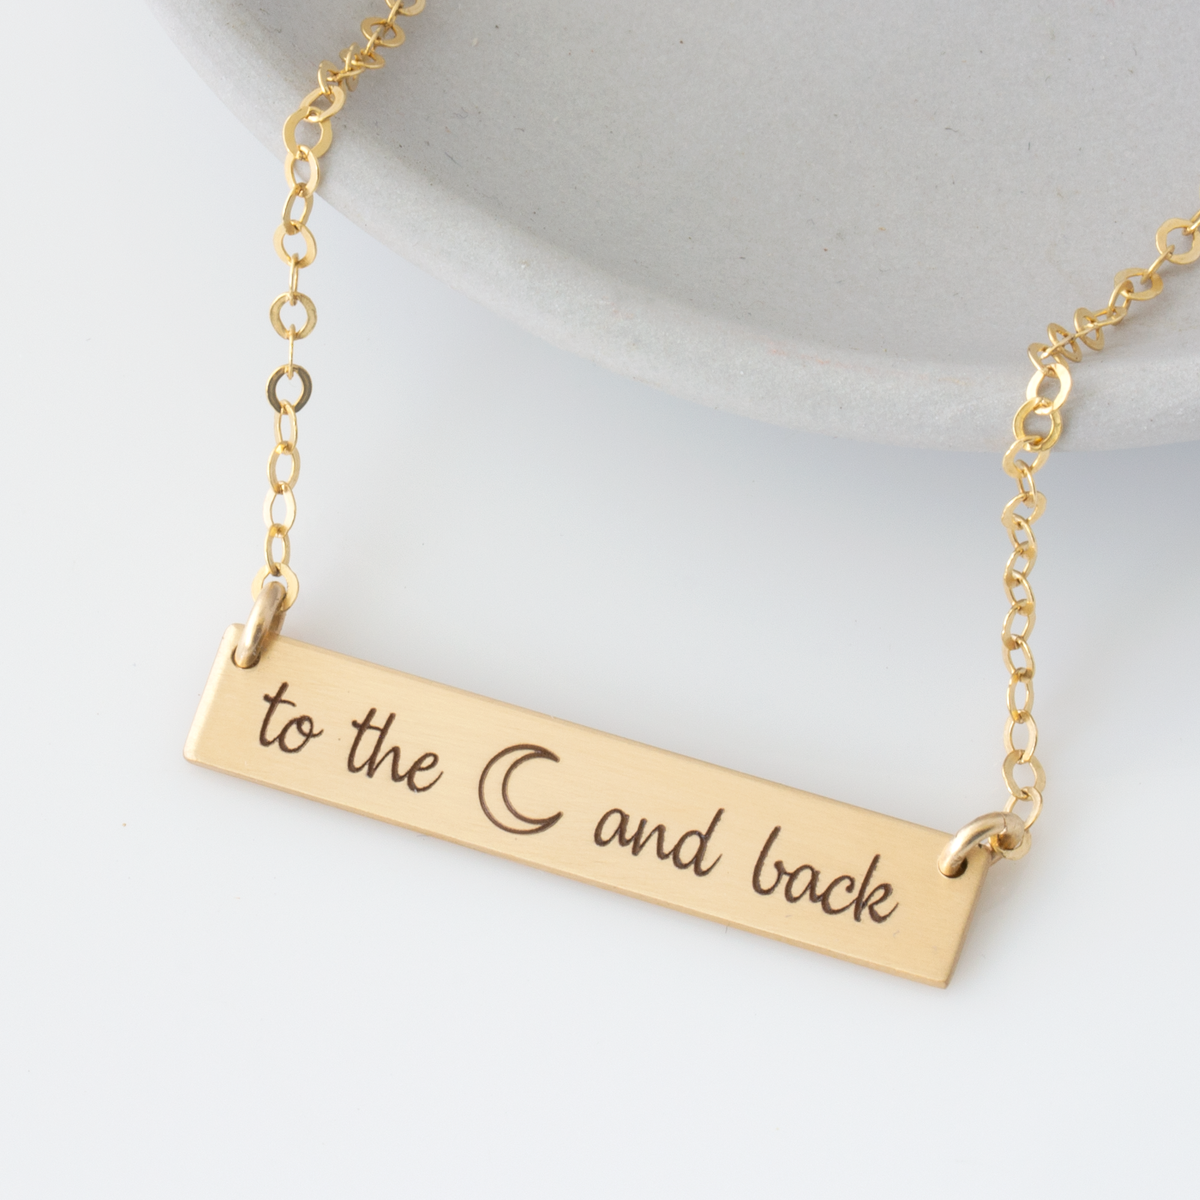 TO THE MOON & BACK NECKLACE ROUND NECKLACE - Cleopatra Bling